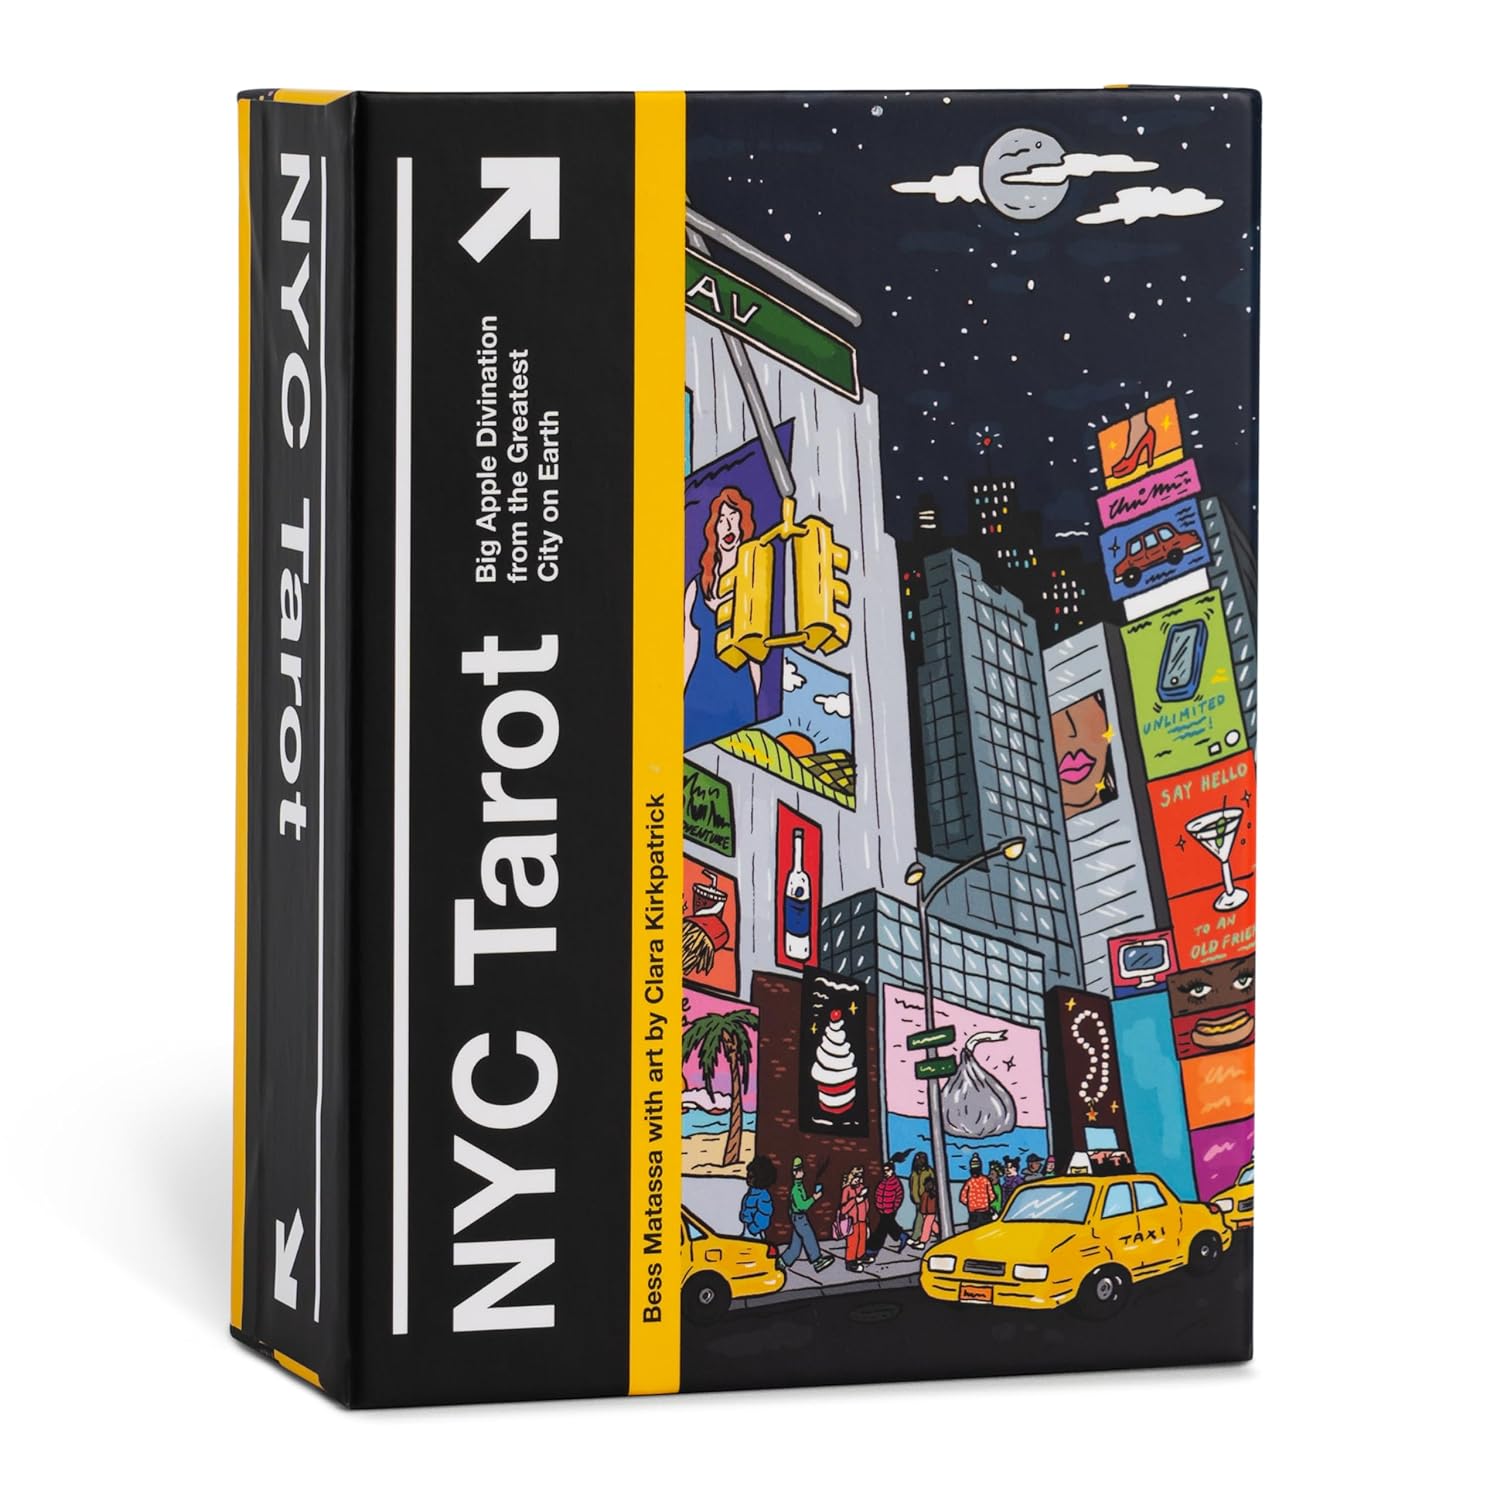 NYC Tarot: Big Apple Divination from the Greatest City on Earth